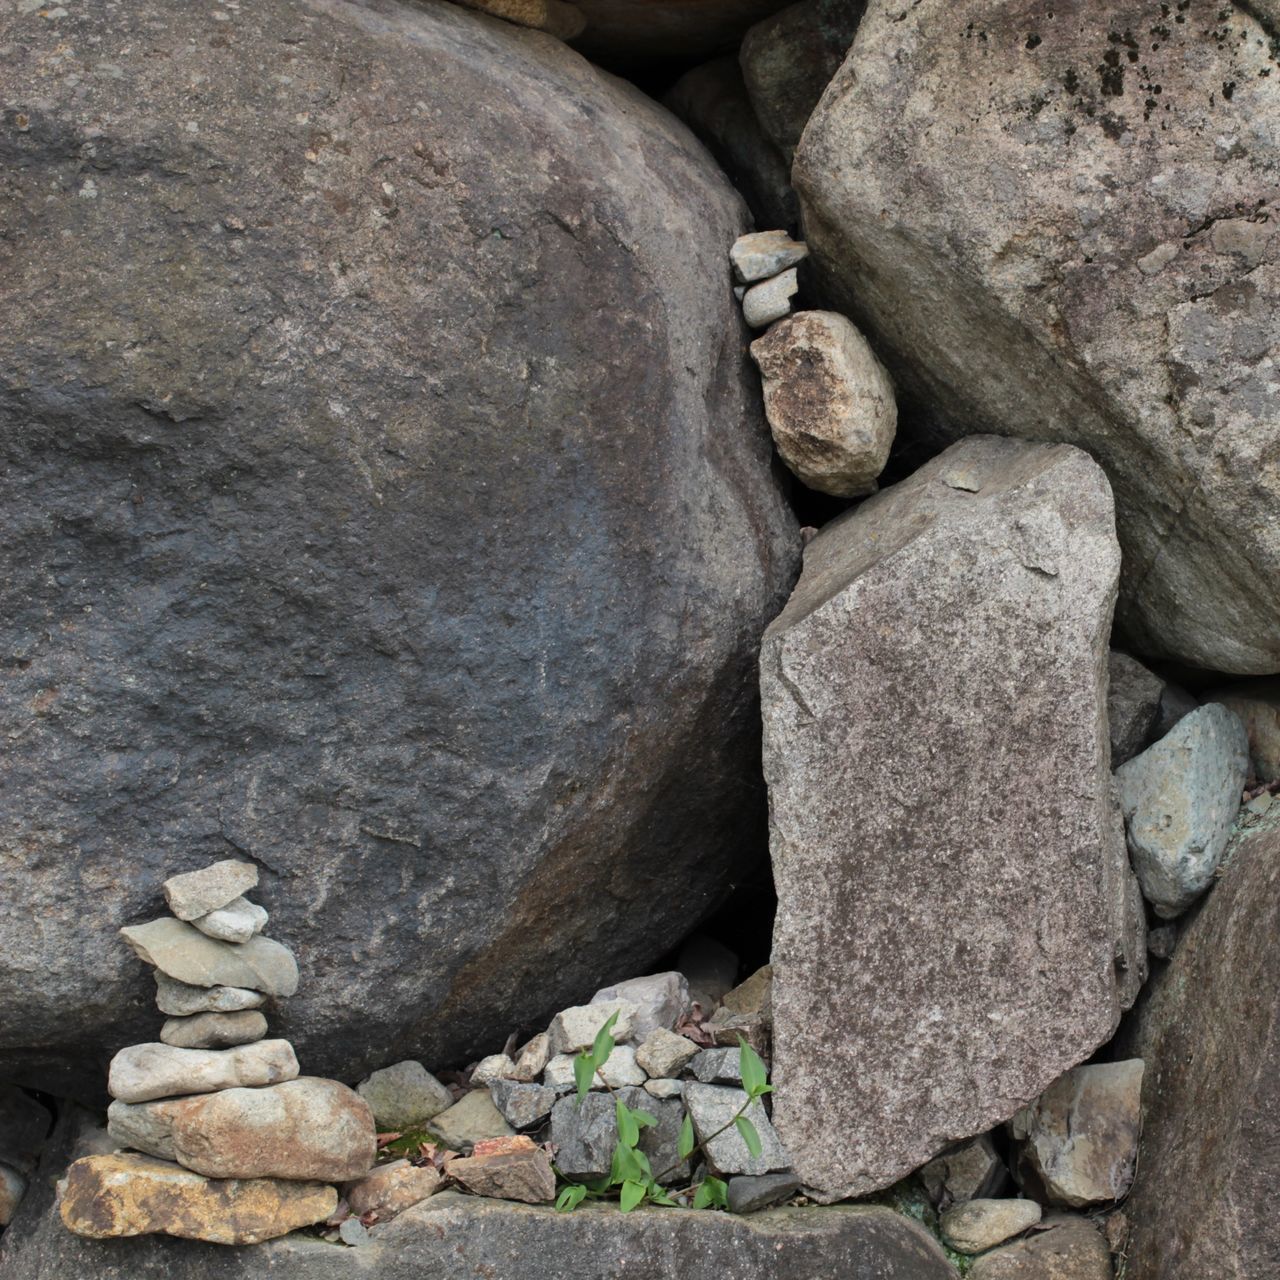 rock - object, textured, stone - object, stone, rock formation, rock, rough, pebble, nature, backgrounds, full frame, close-up, day, geology, outdoors, tranquility, natural pattern, stack, no people, eroded